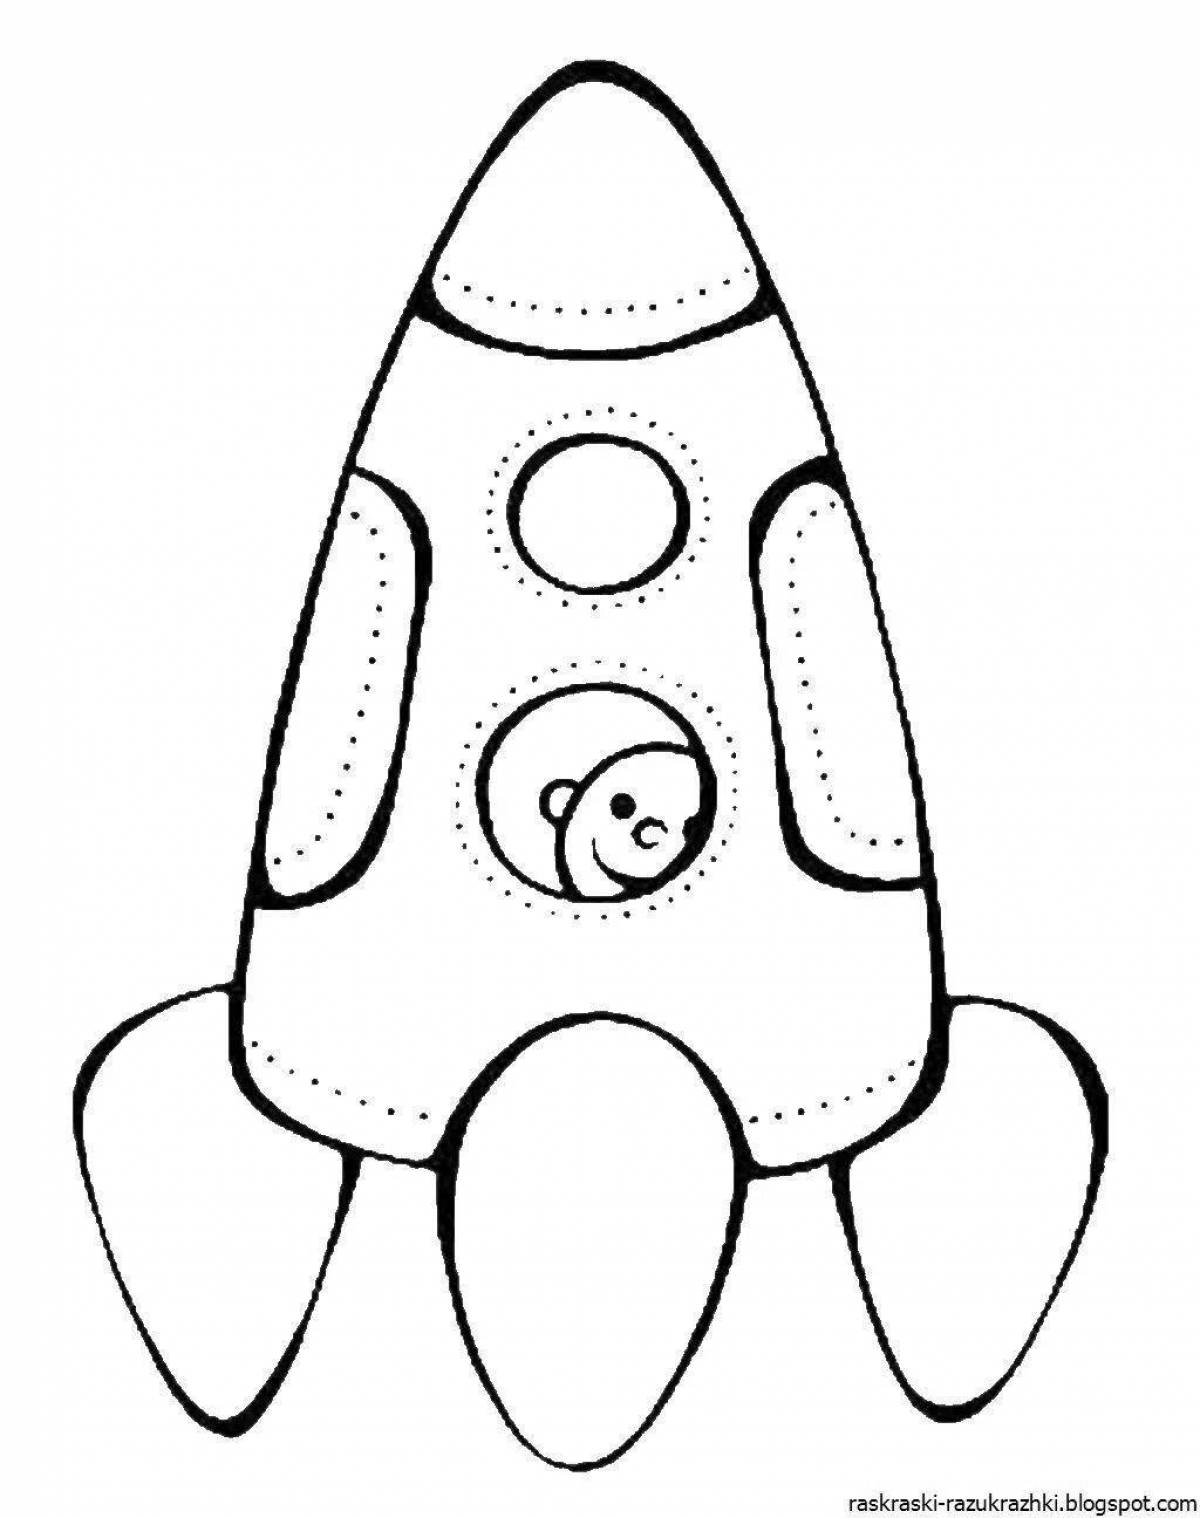 Dynamic rocket coloring book for 3-4 year olds